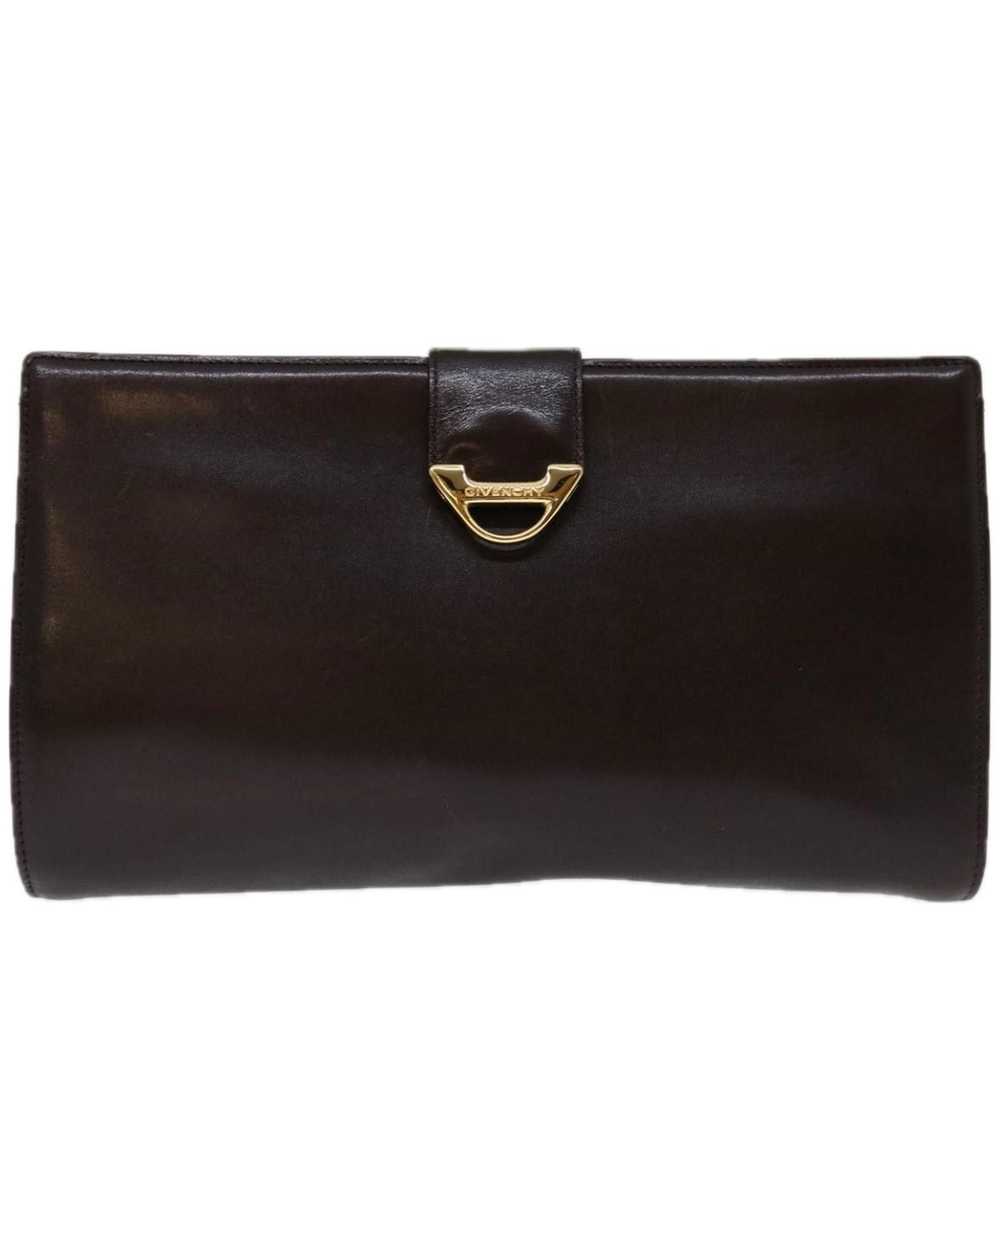 Givenchy Brown Leather Clutch Bag with Elegant De… - image 2